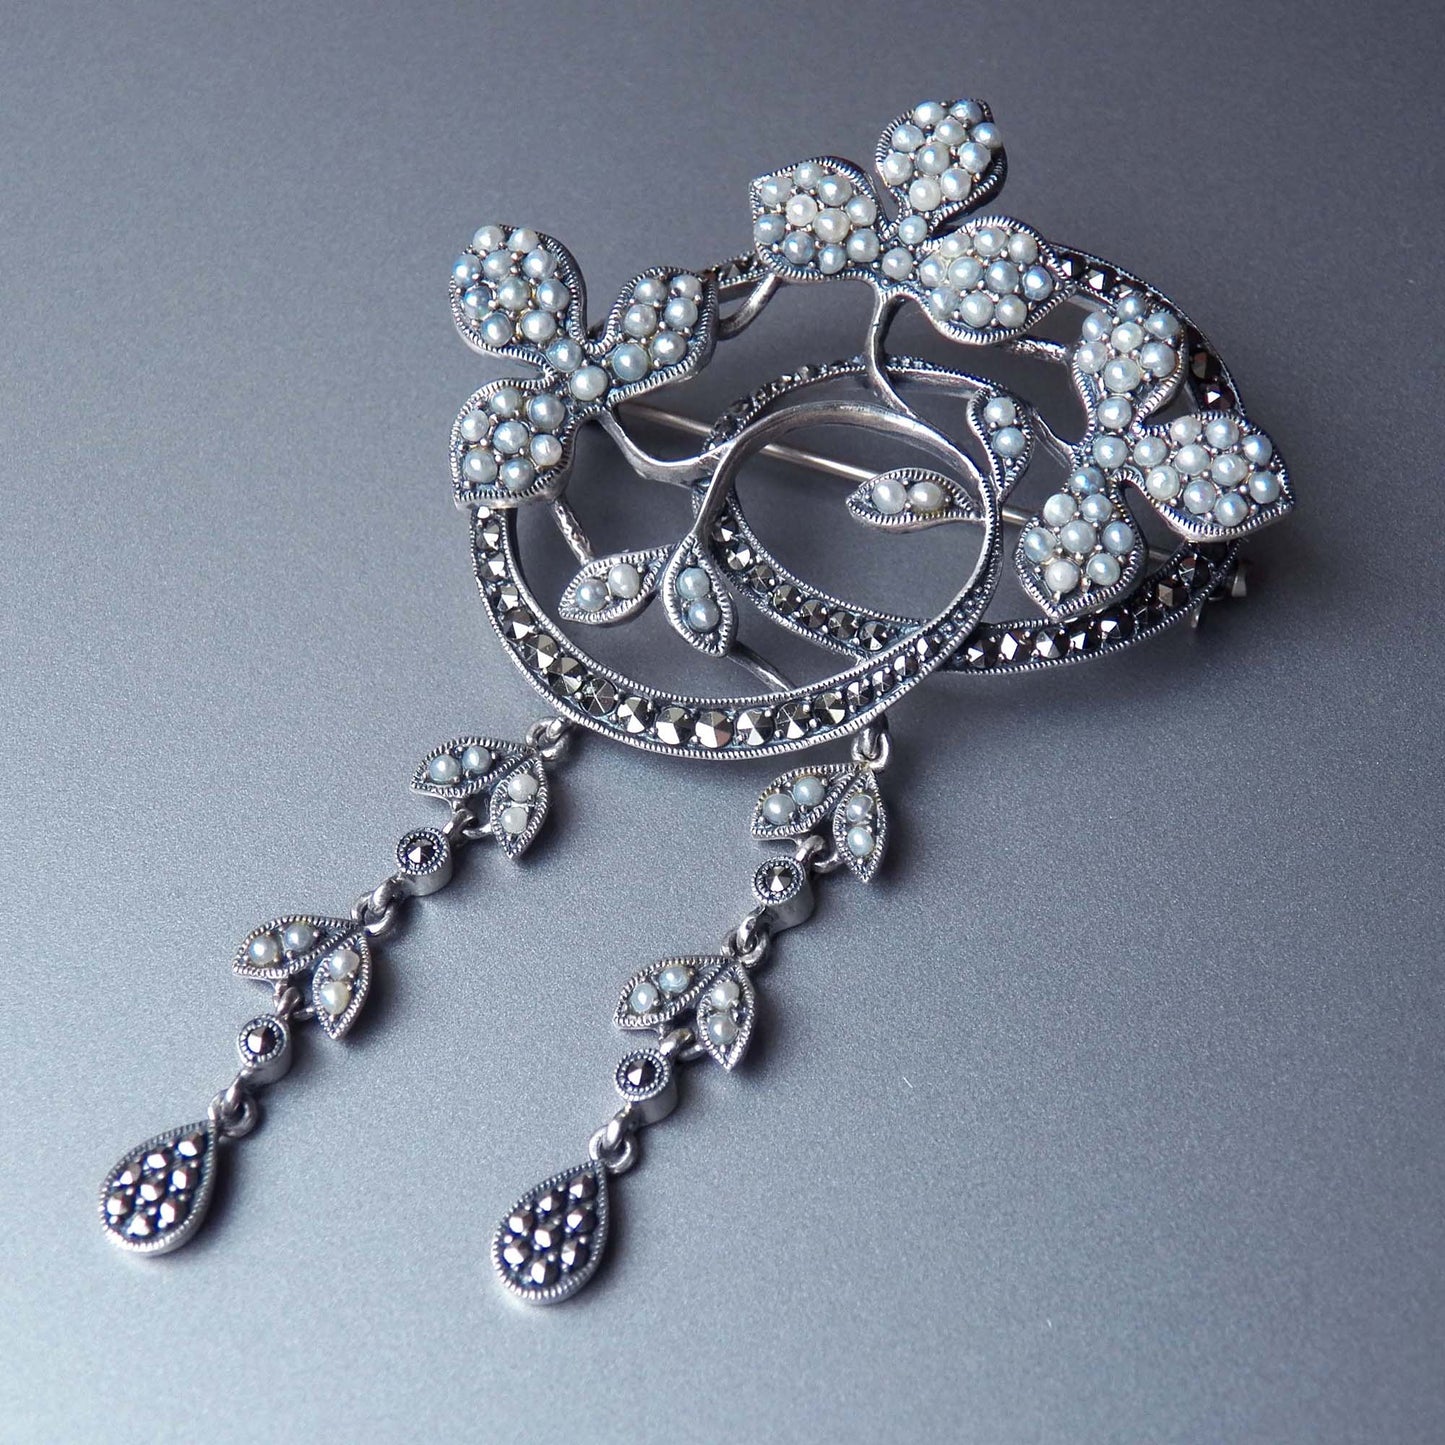 Victorian revival brooch with seed pears and marcasites